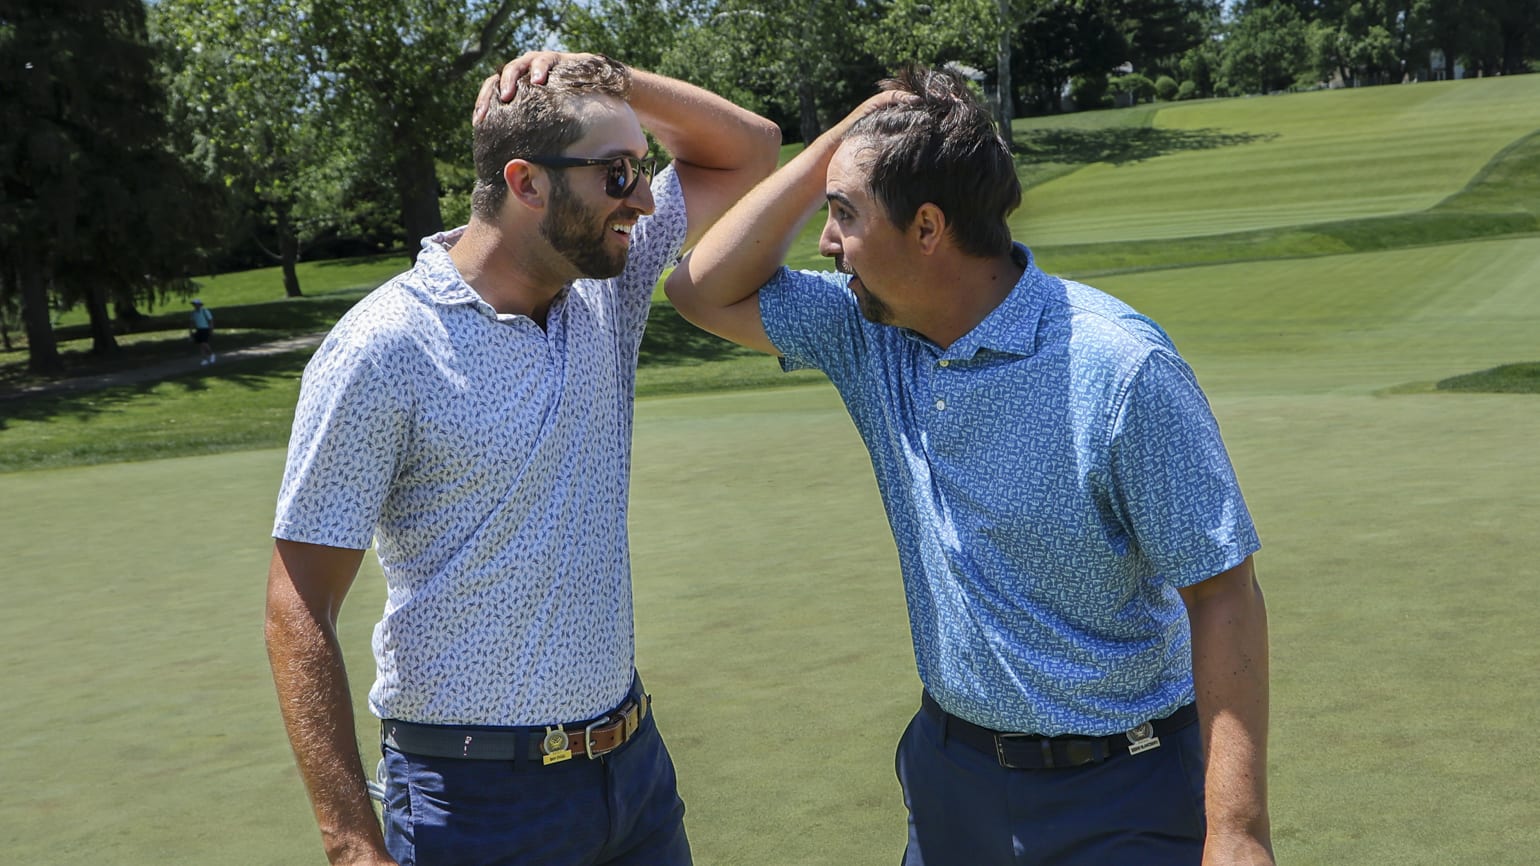 Sam Engel (left) and Brian Blanchard surpassed their own expectations in reaching the semifinals at Philadelphia Cricket Club. (USGA/Jonathan Ernst)